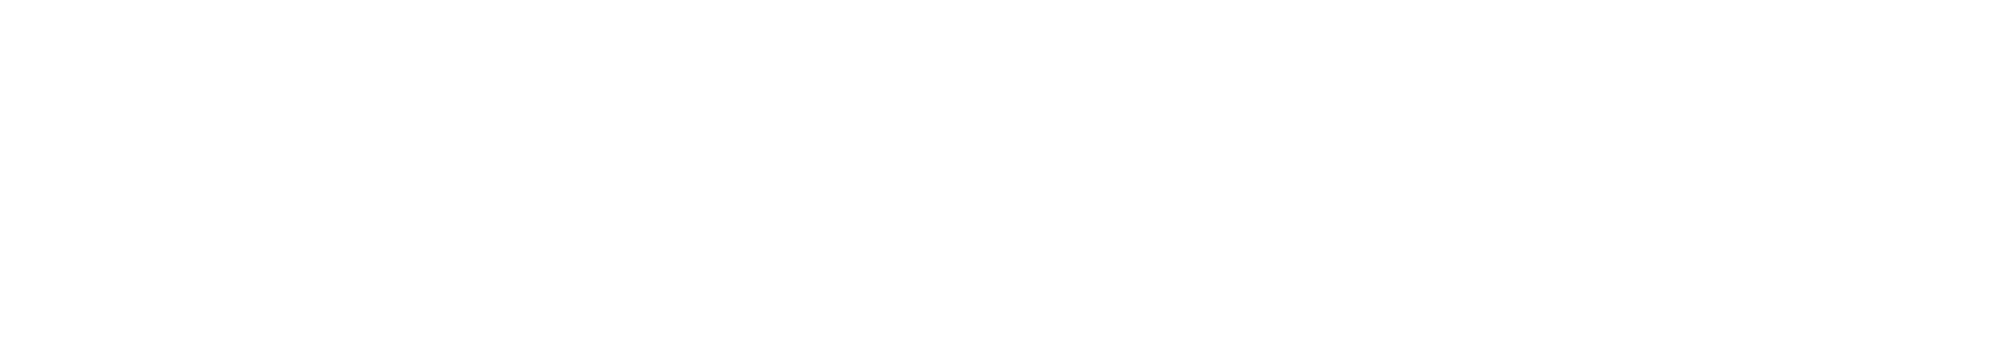 https://www.ddc.ee/wp-content/uploads/2015/11/modena_logo_white.png